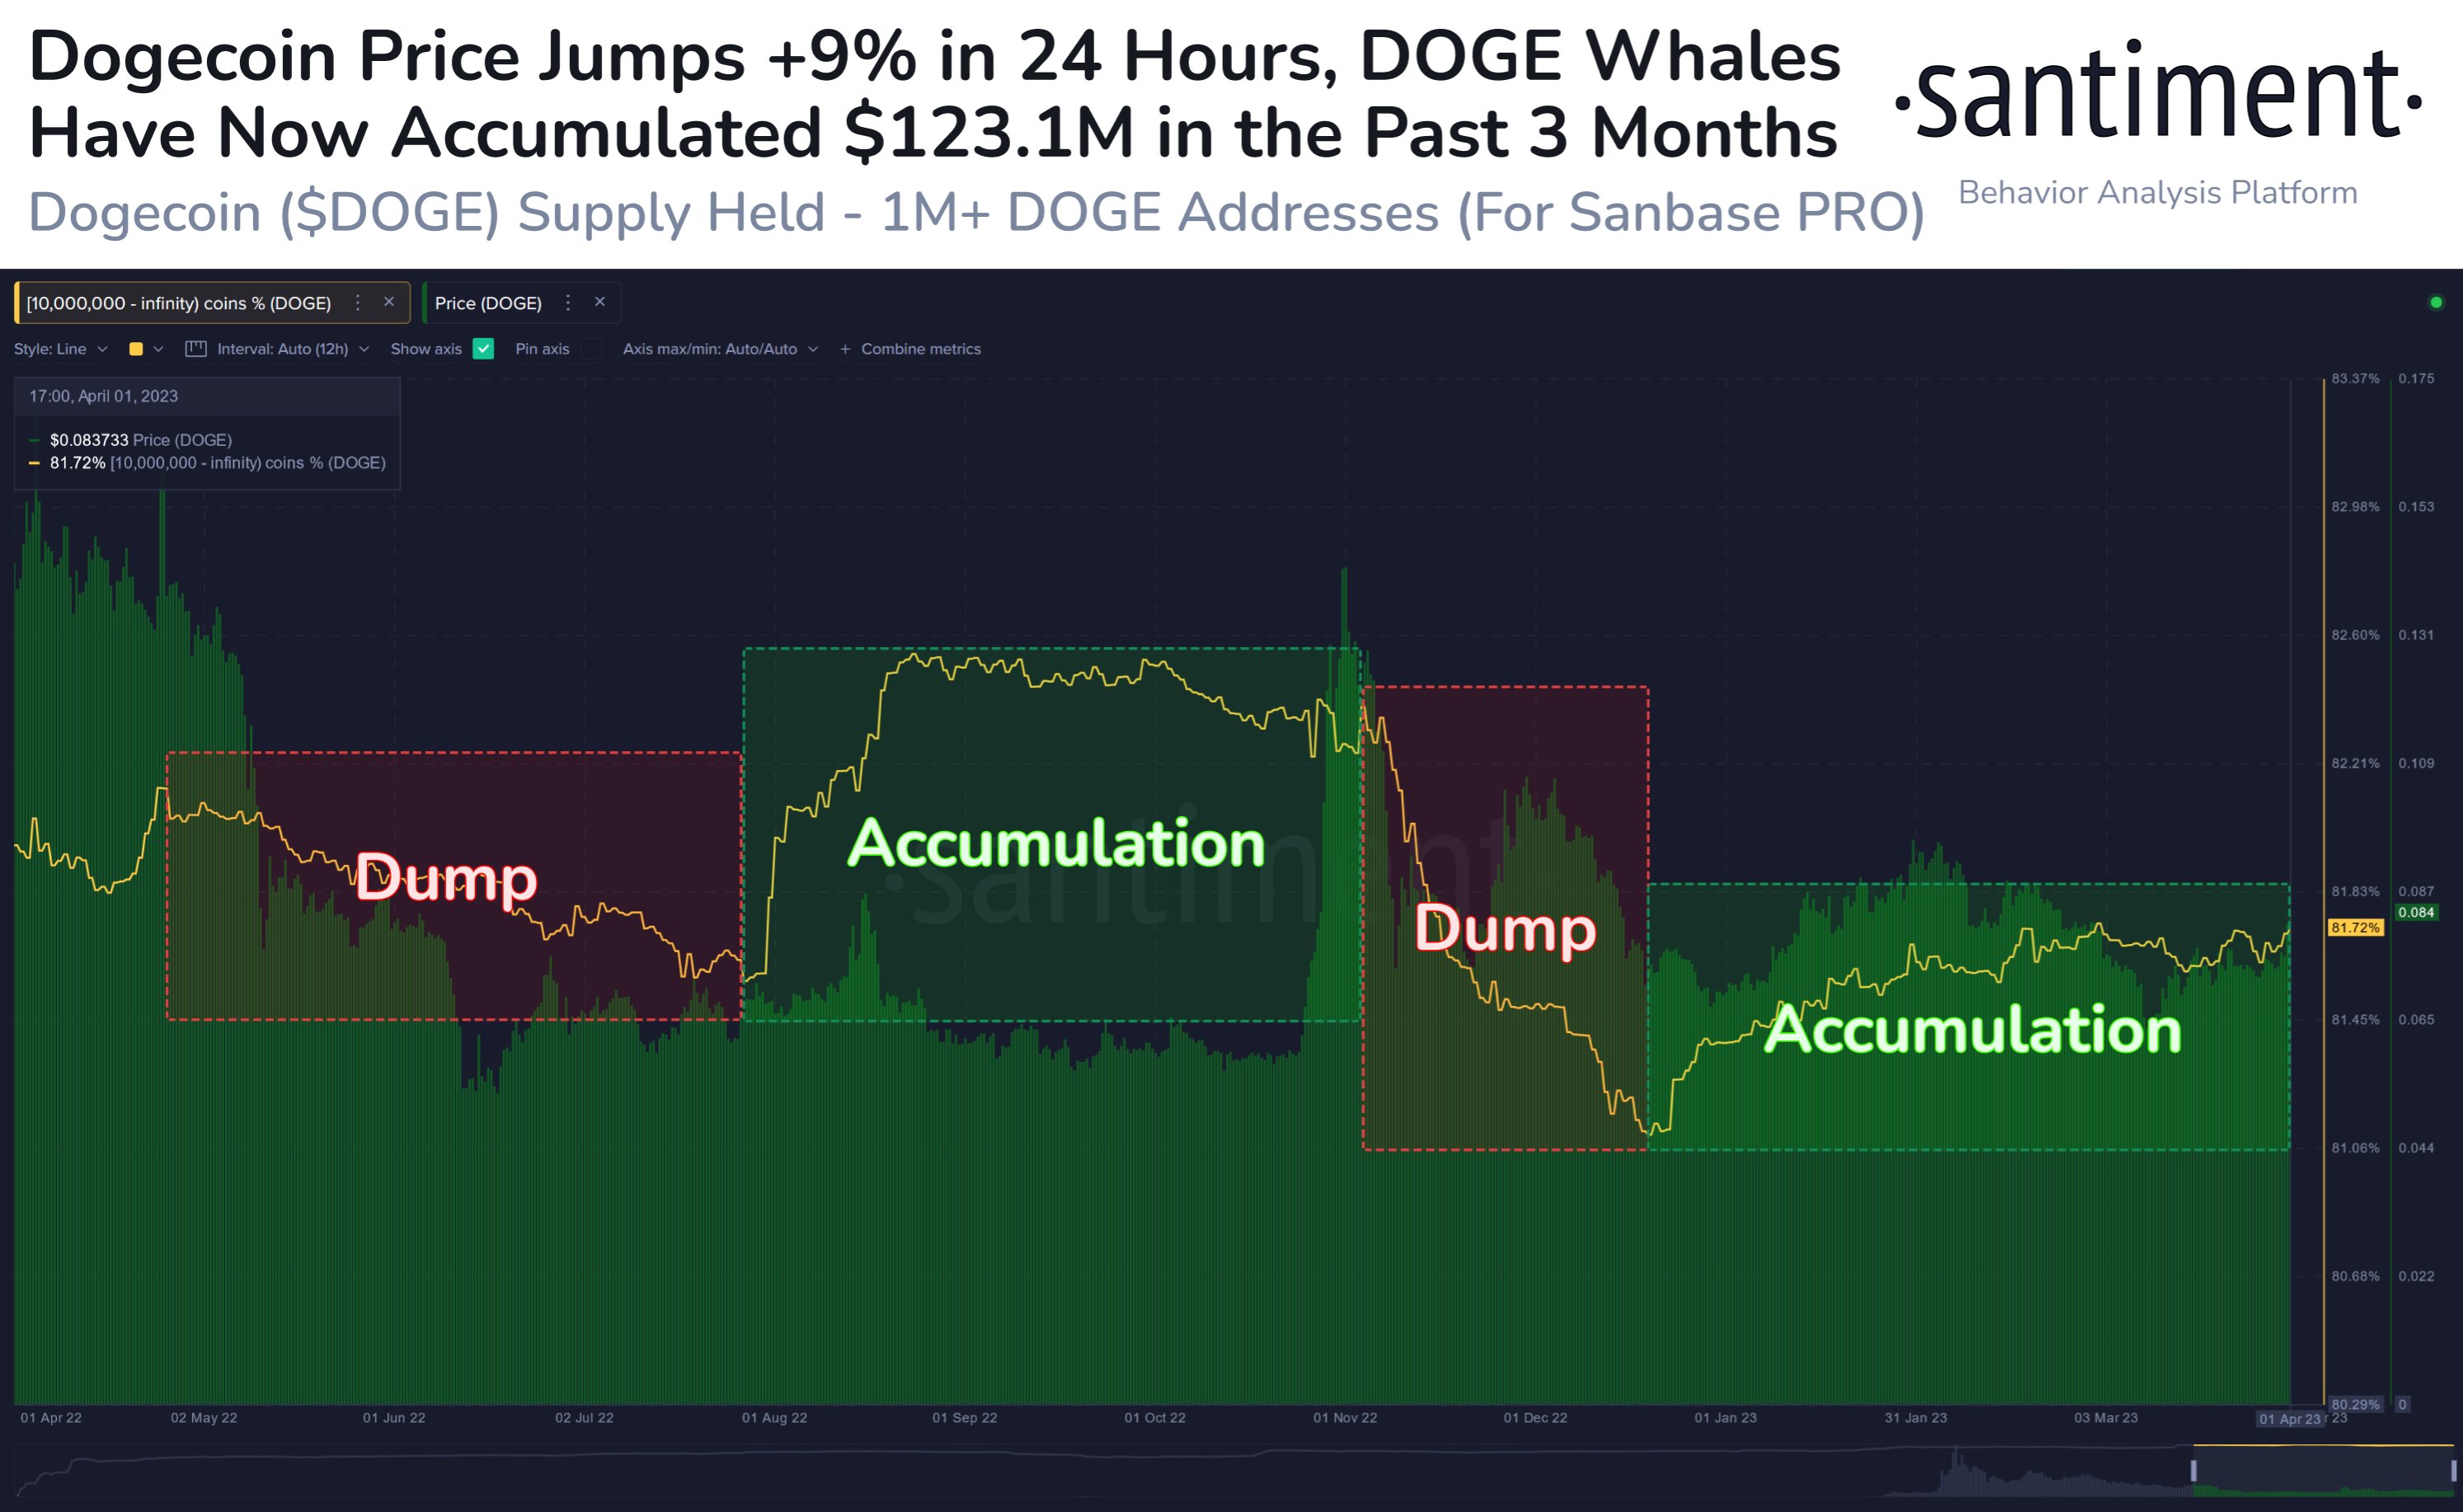 DOGE accumulation and recent decoupling